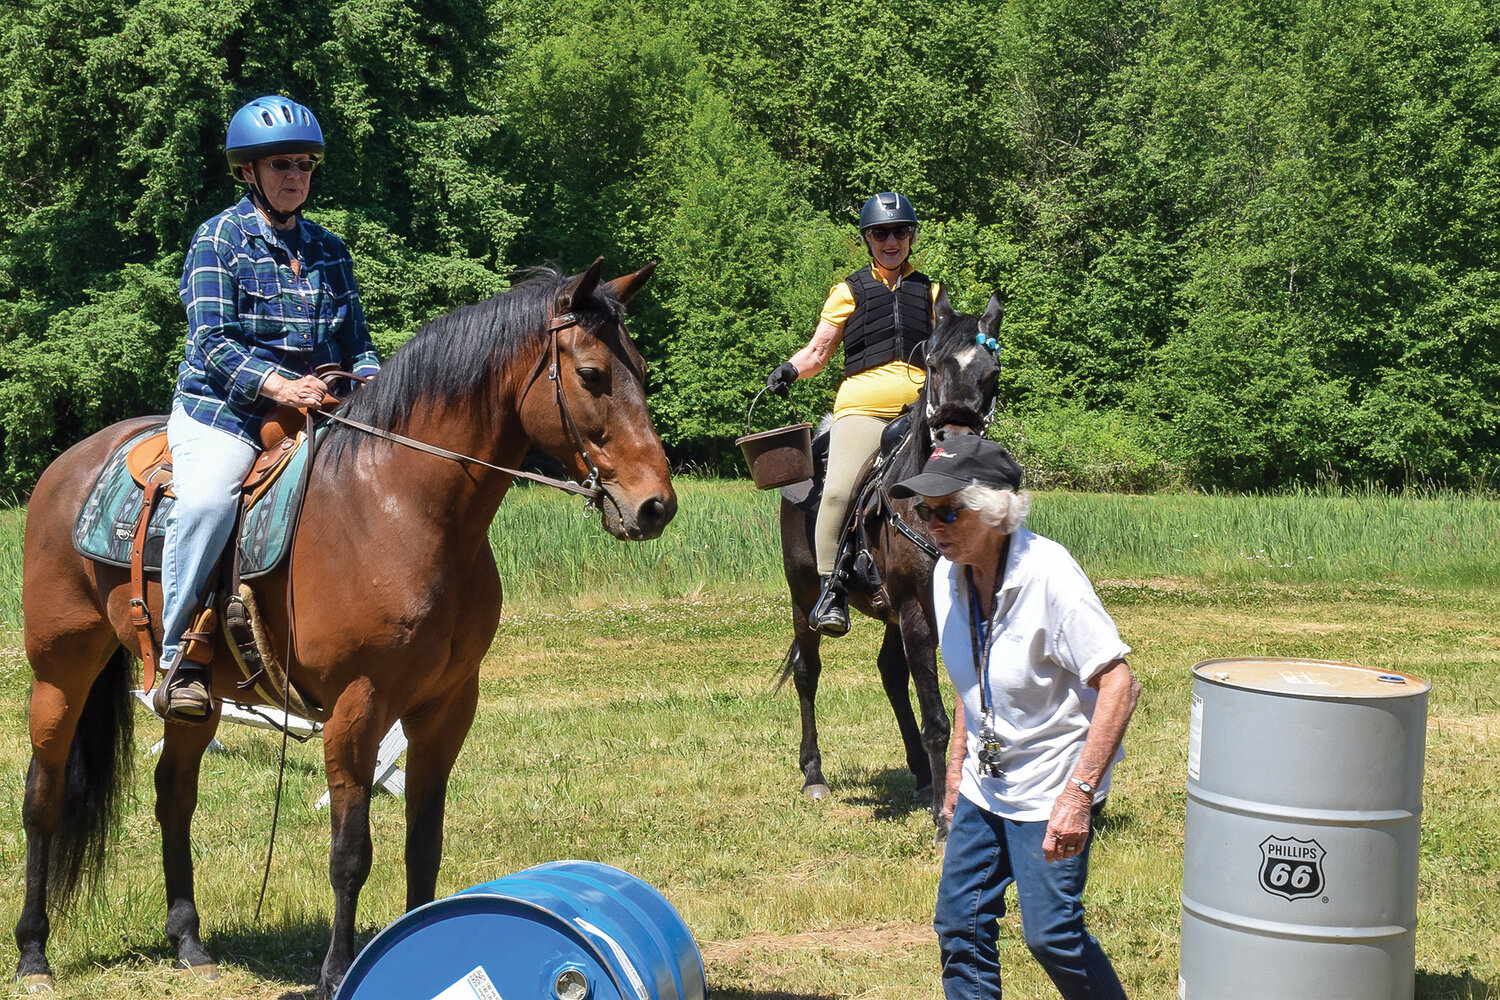 Fran Duncan heads to adjust an obstacle during the Clark County Saddle Club’s trail course event on June 3.